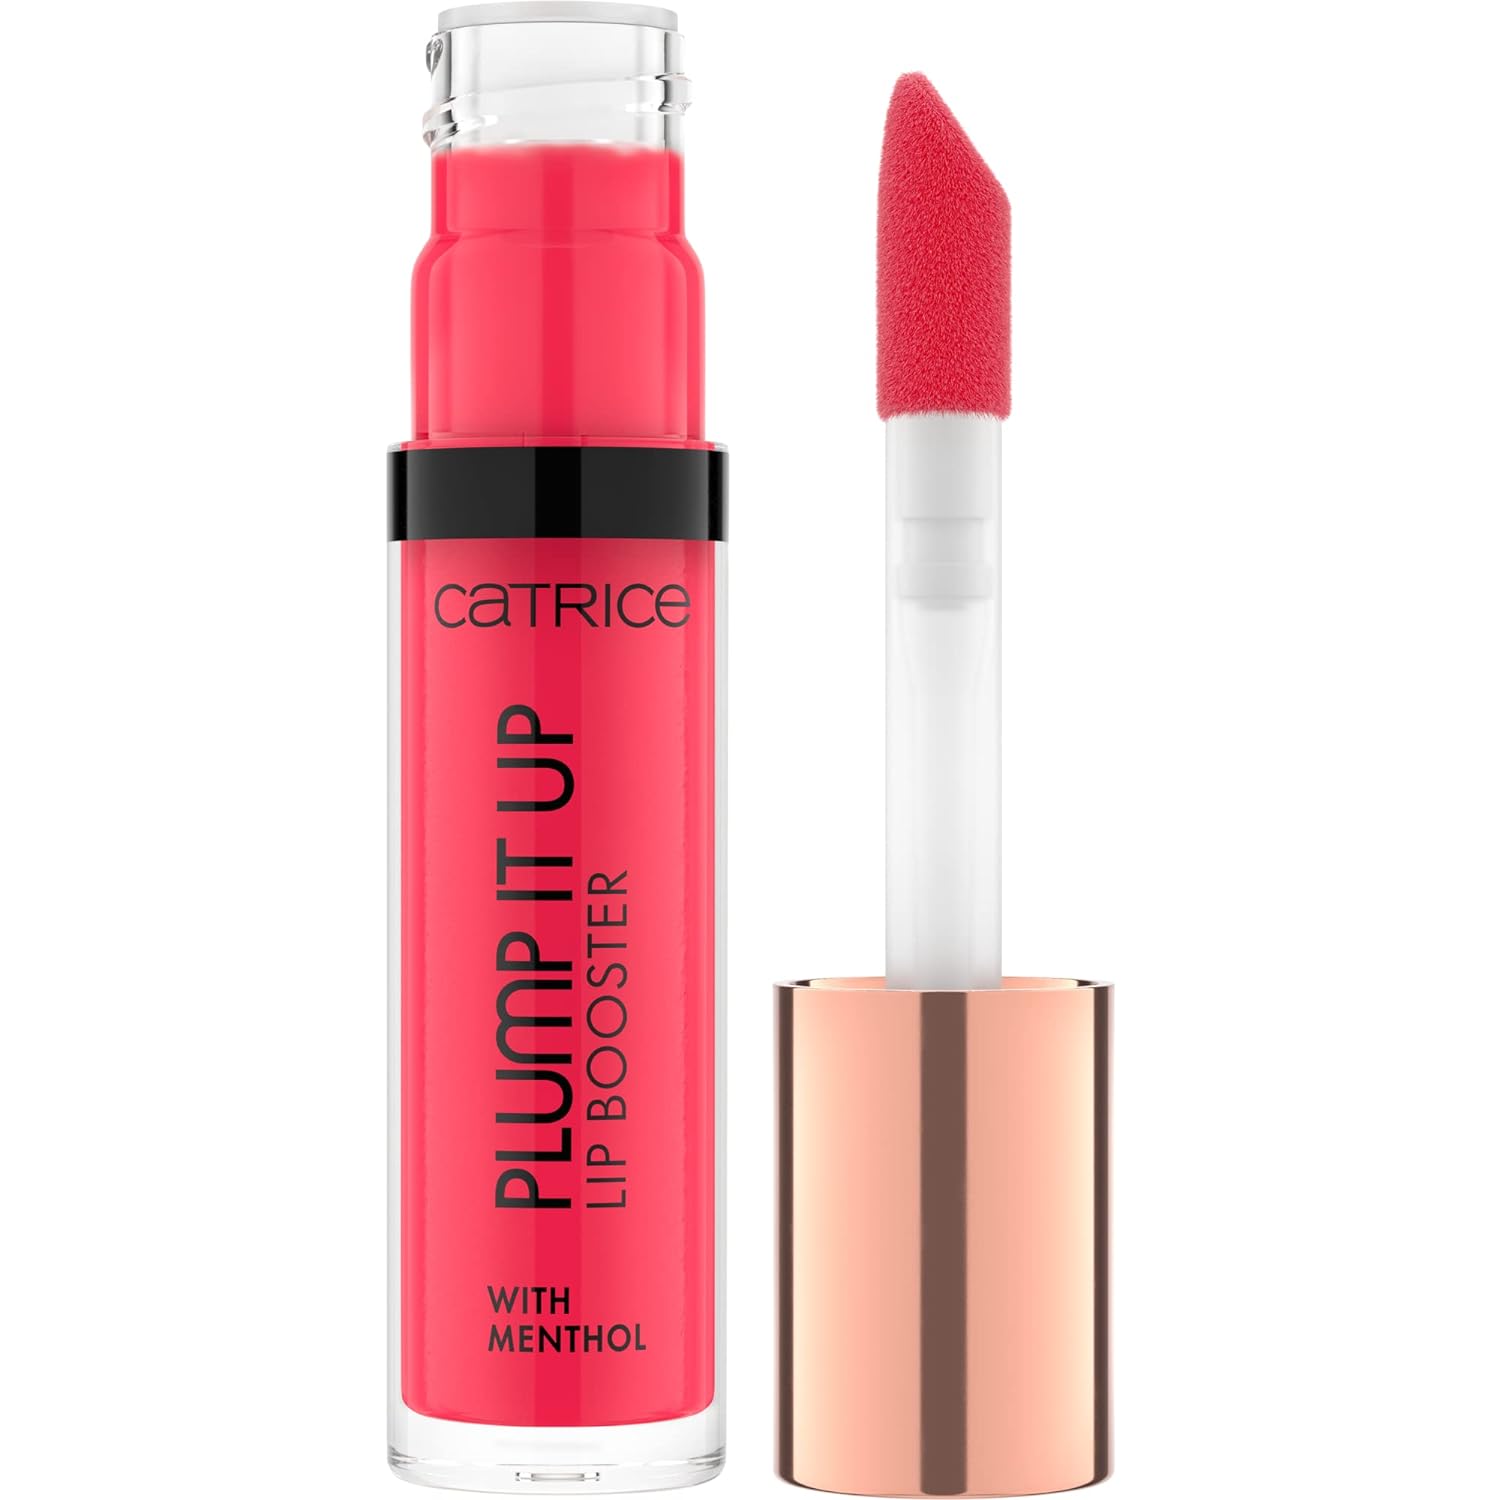 Catrice Plump IT Up Lip Booster, Lip Gloss, No. 090 Potential Scandalous, Red, Cooling, Coloring Effect, Adds Volume, Glossy, Vegan, Alcohol Free, 3.5 ml